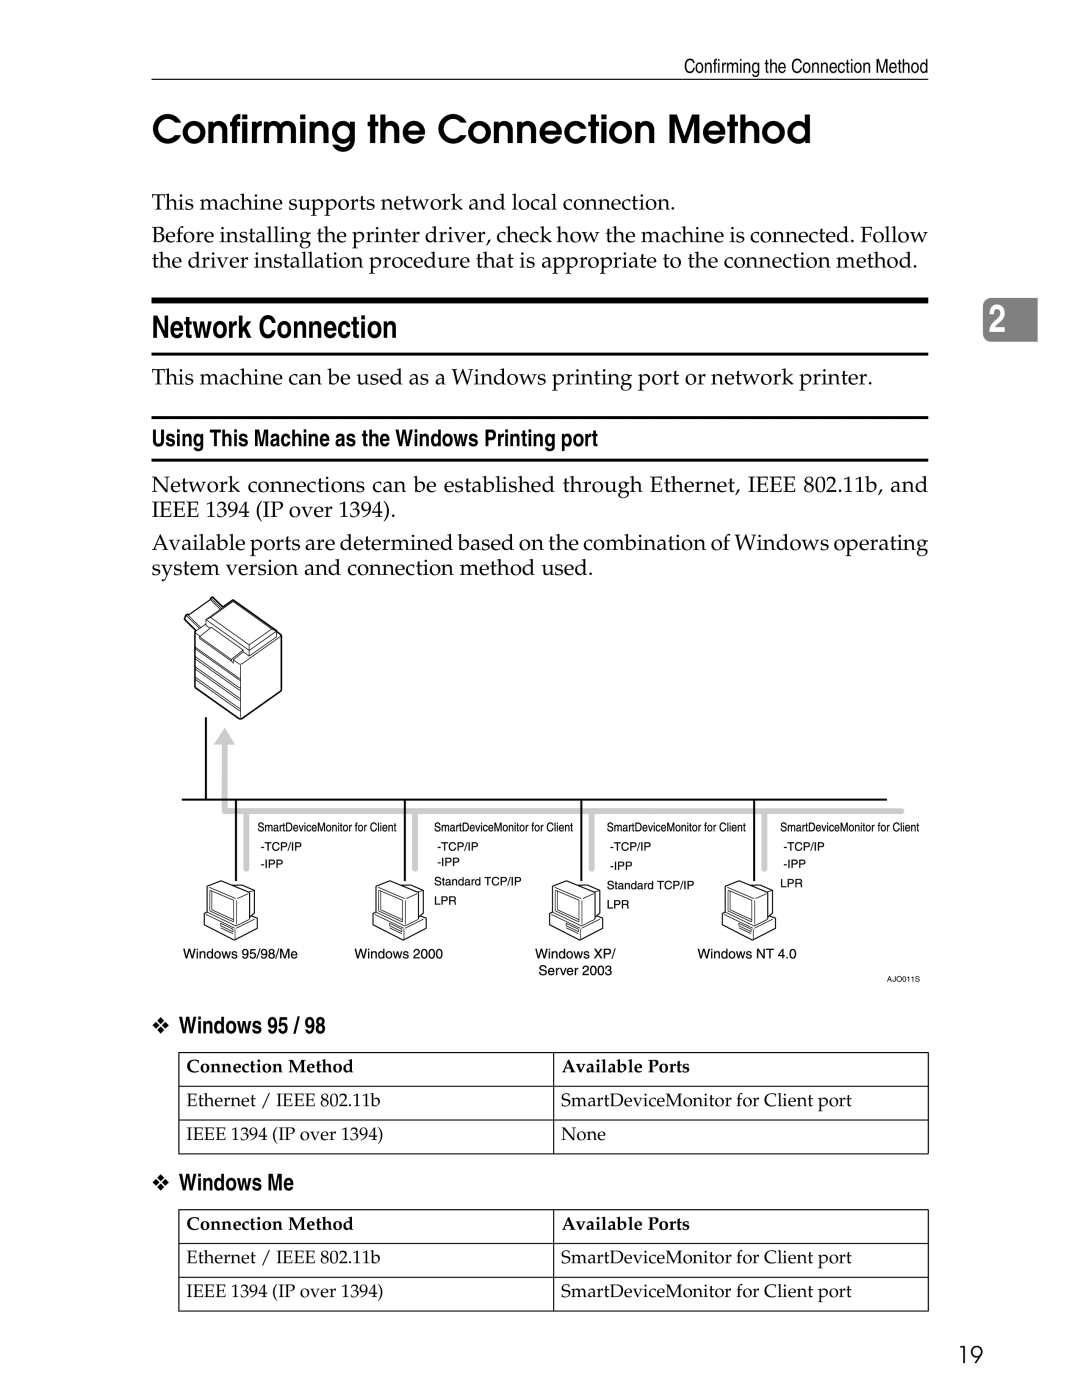 Ricoh 3030 appendix Confirming the Connection Method, Network Connection, Using This Machine as the Windows Printing port 